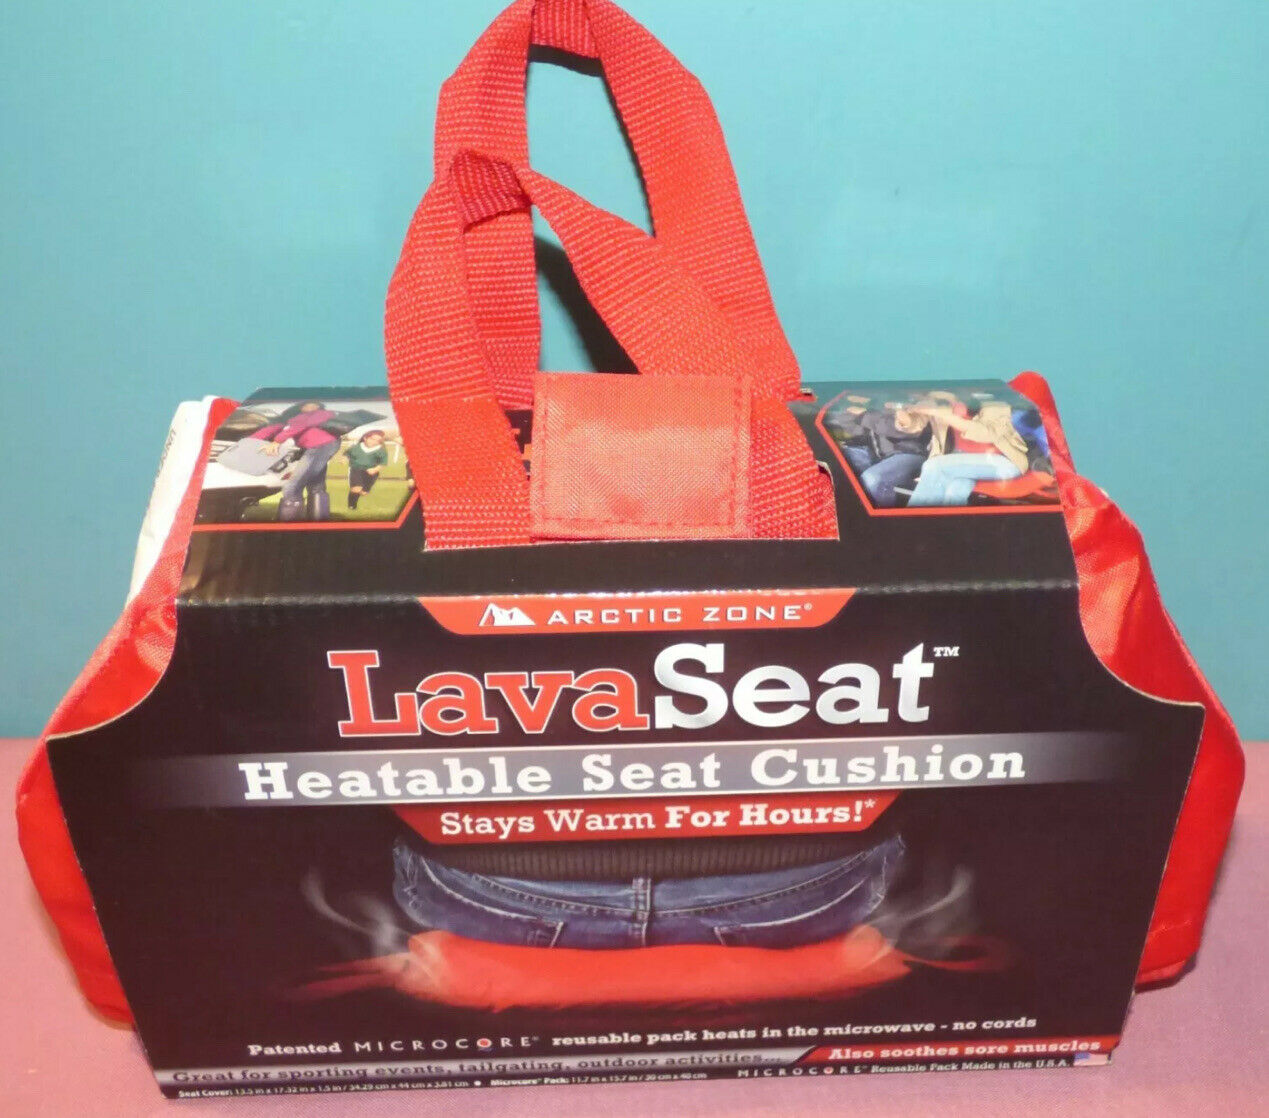 New Arctic Zone Lava Seat Heatable Seat Cushion "stays Warm Up To 6 Hours" Red